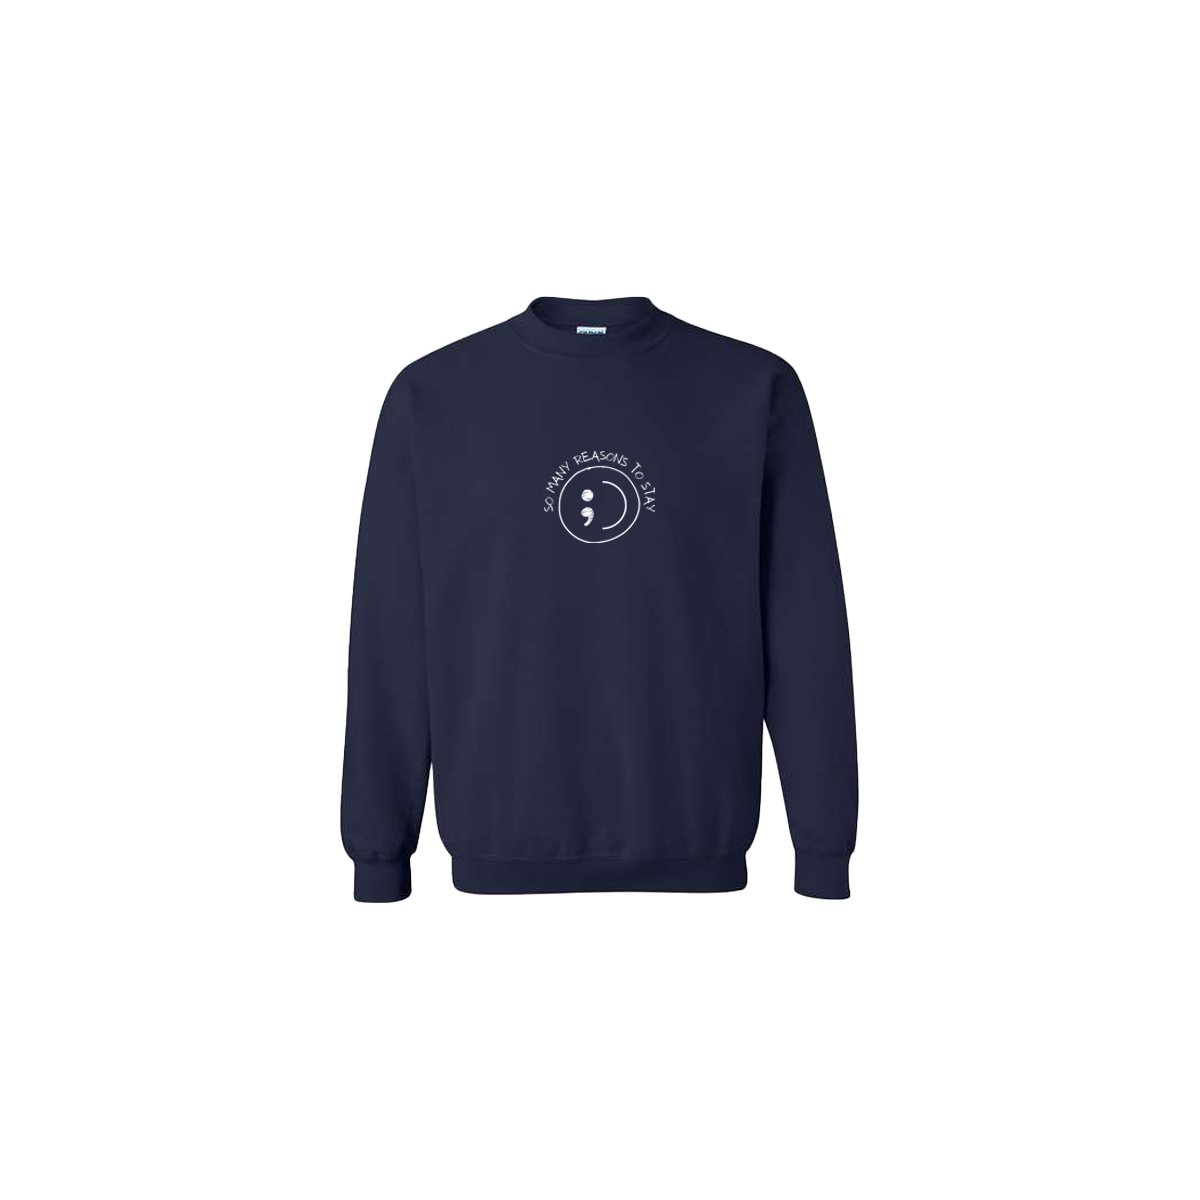 So Many Reasons to Stay Embroidered Navy Blue Crewneck - Mental Health Awareness Clothing